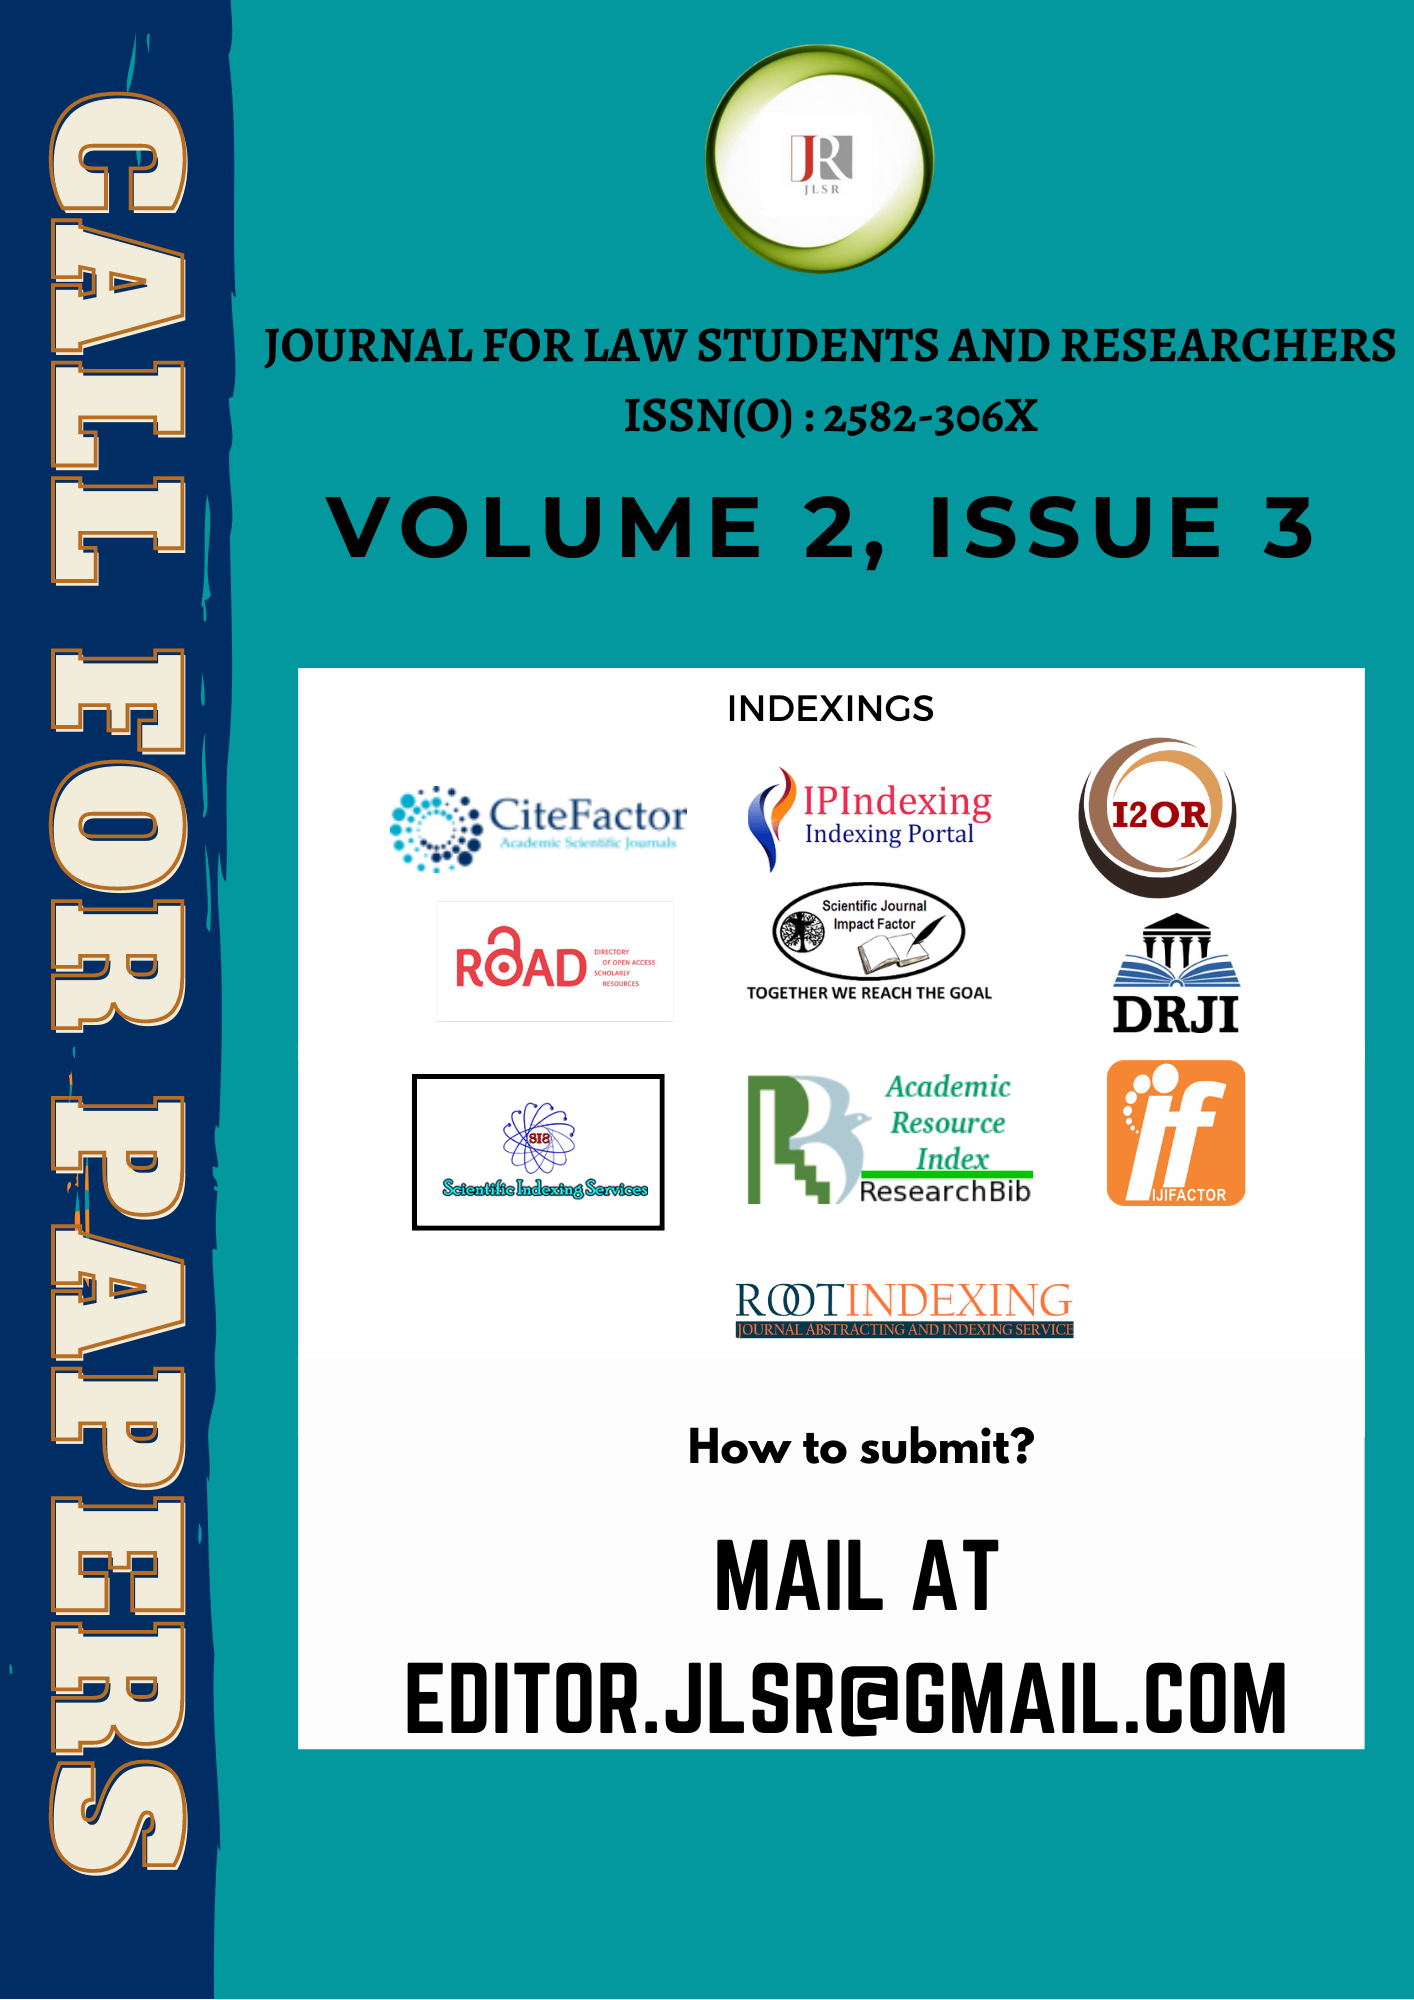 call for papers - JLSR